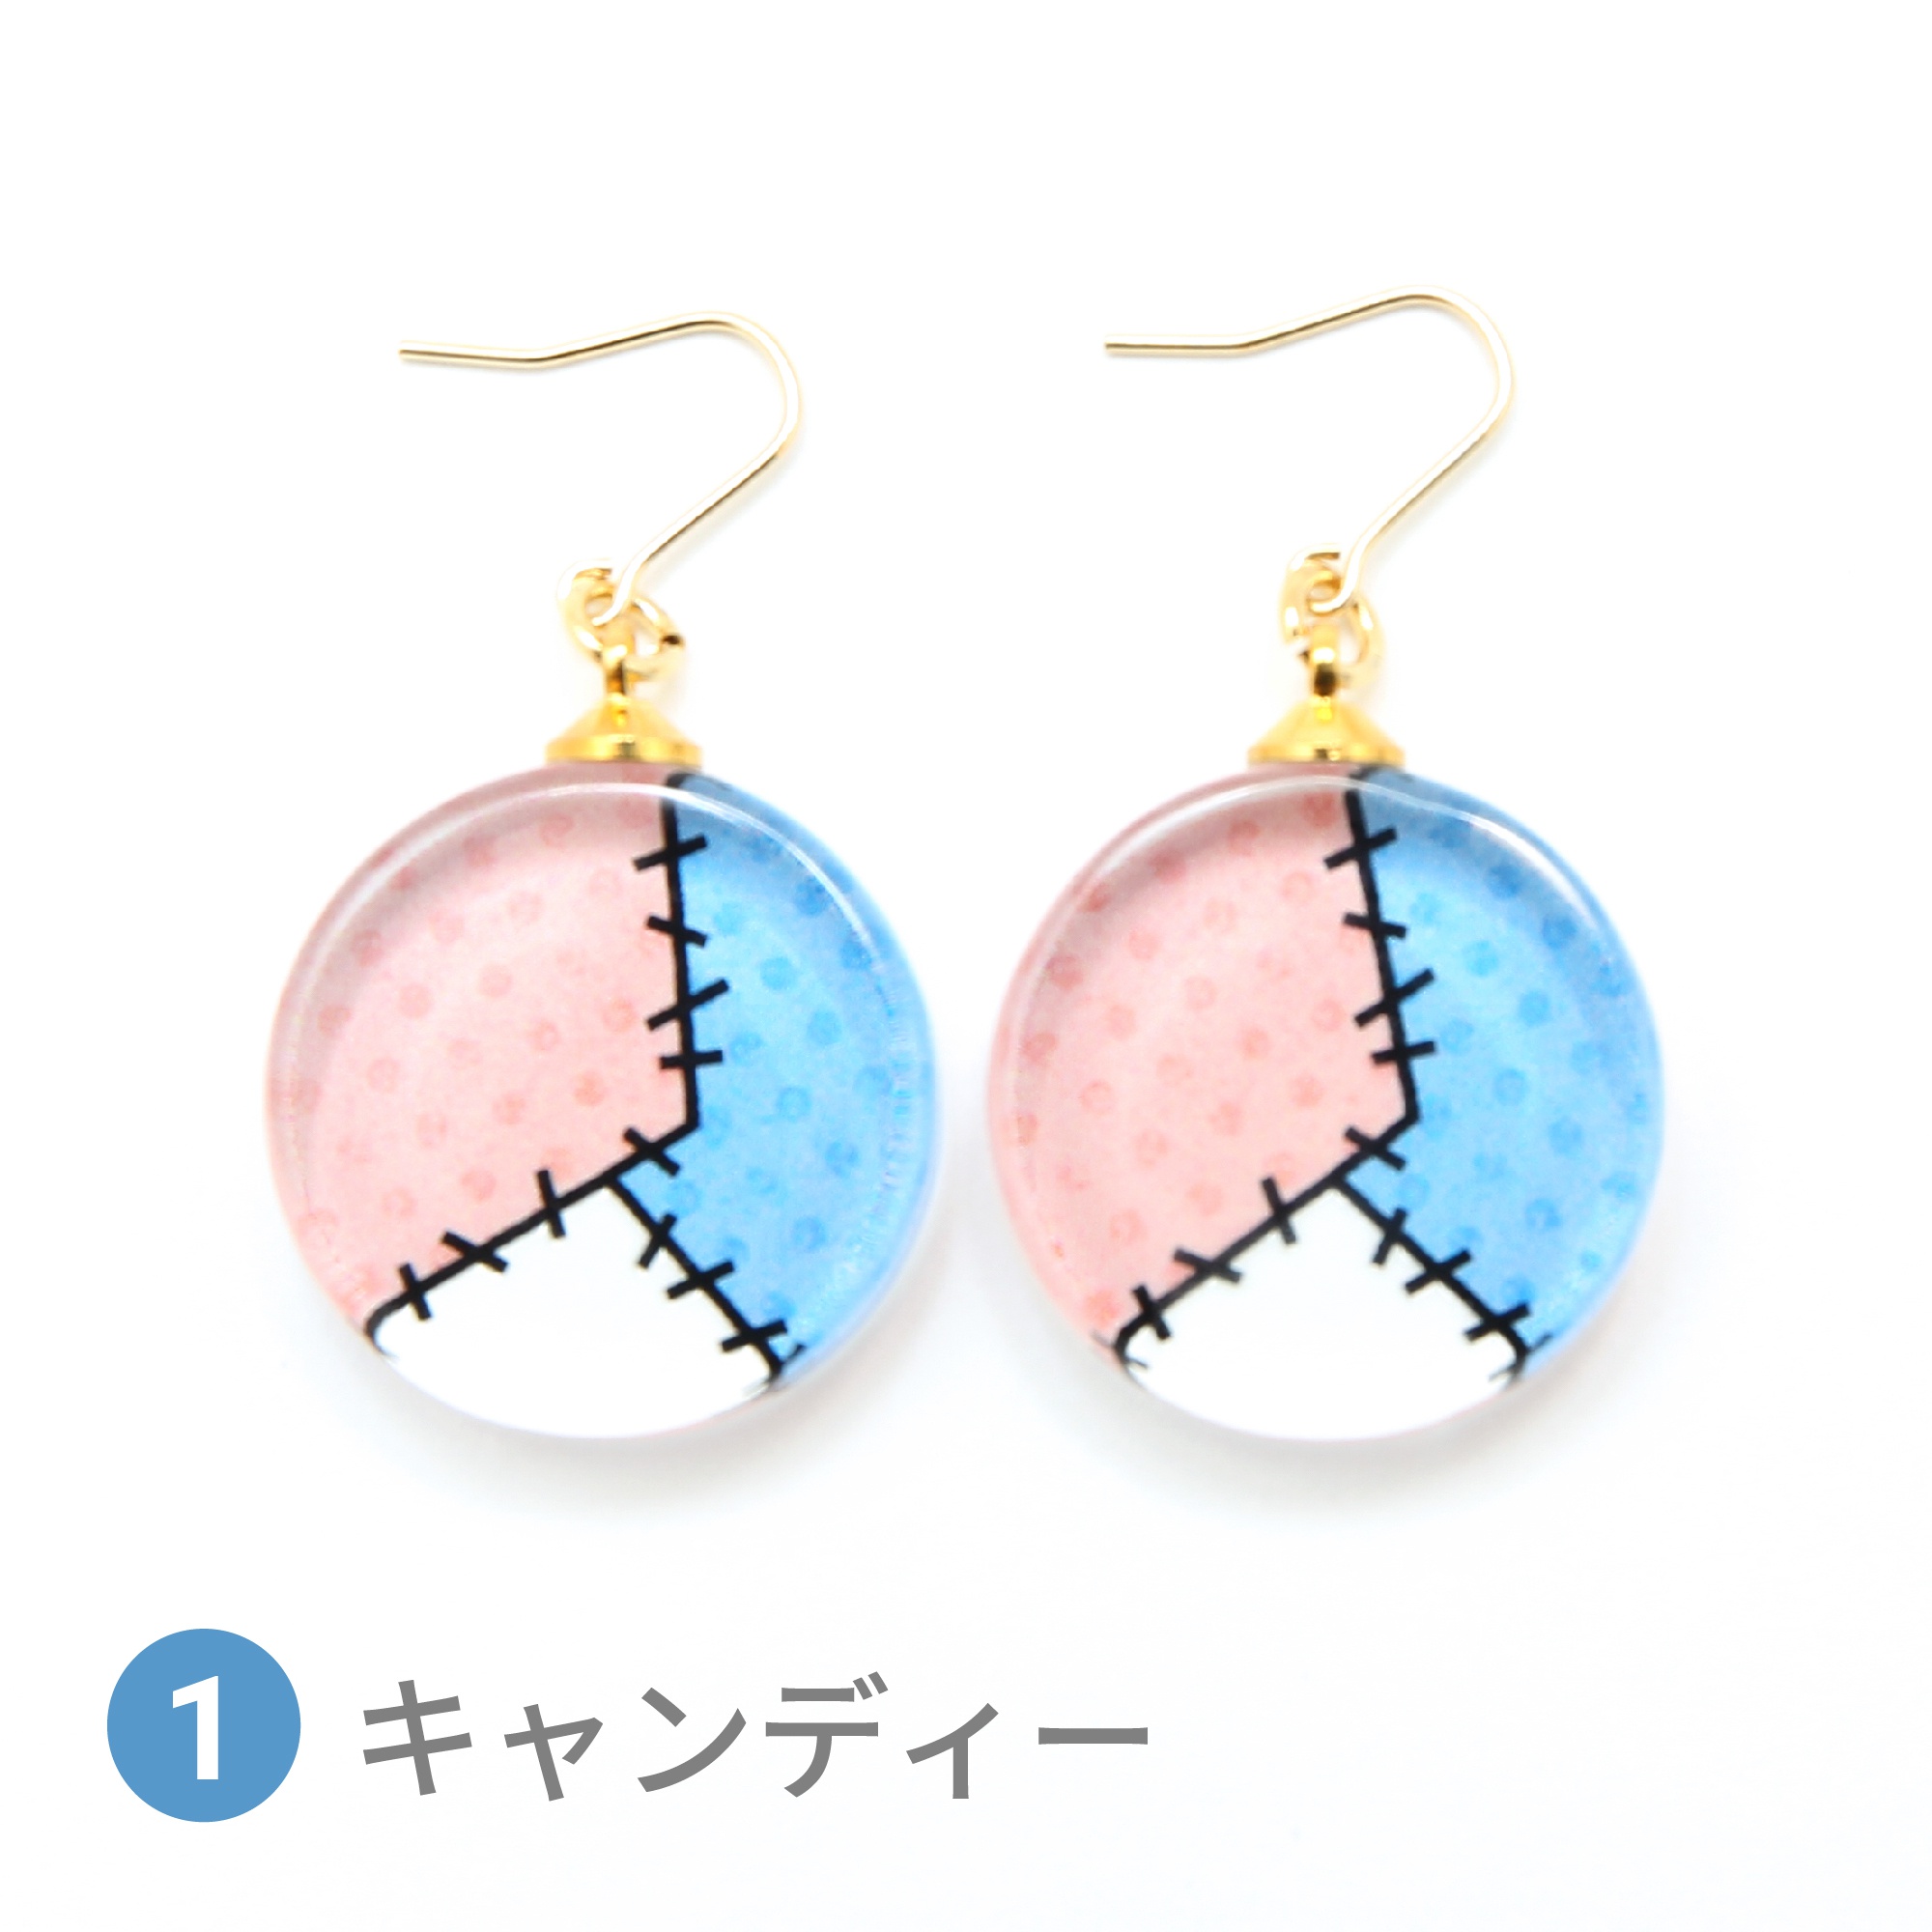 Glass accessories Pierced Earring PATCHWORK candy round shape